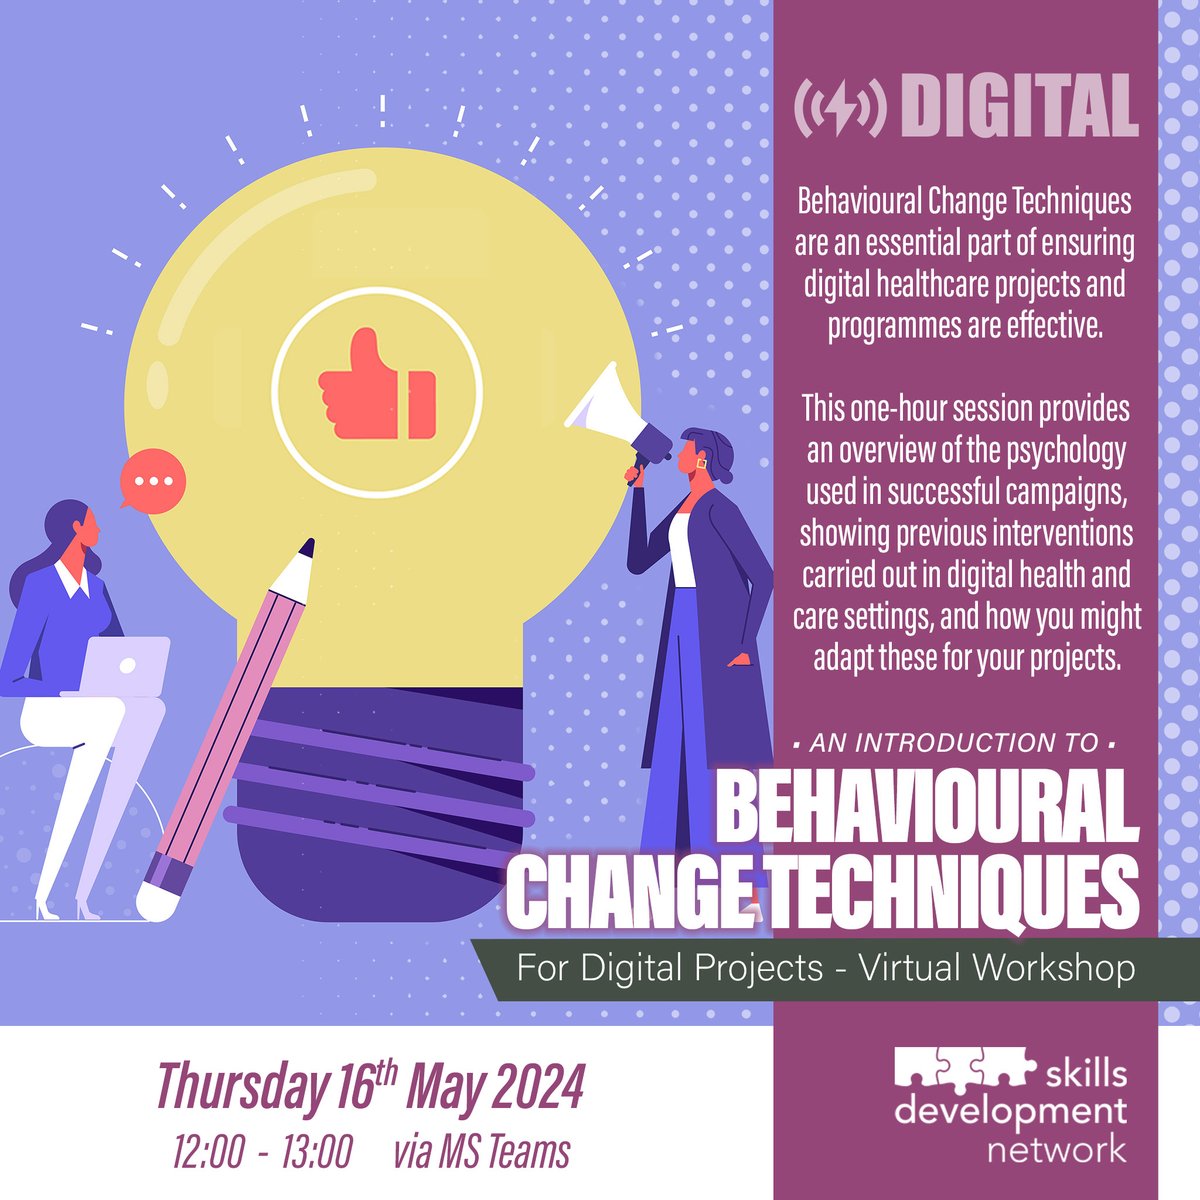 Behavioural Change Techniques are a growing area of interest in healthcare - but what are these BCTs and how do they work? Digital Programme Director, Rupa Chilvers, provides an introduction to giving your audience a nudge in the right direction... 👉 orlo.uk/FGupI